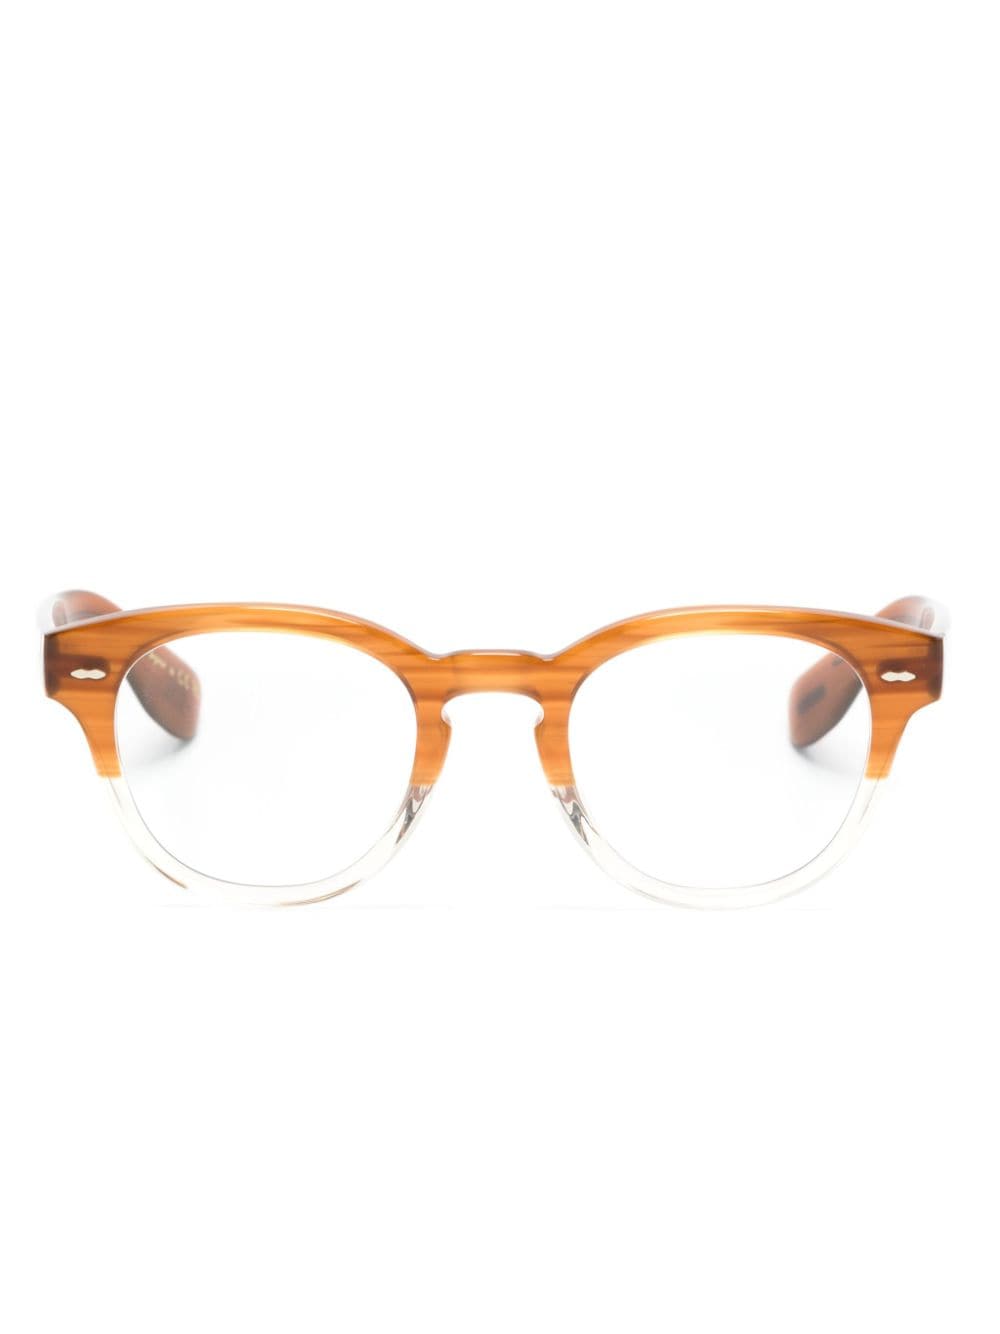 Oliver Peoples Cary Grant round-frame glasses - Brown von Oliver Peoples